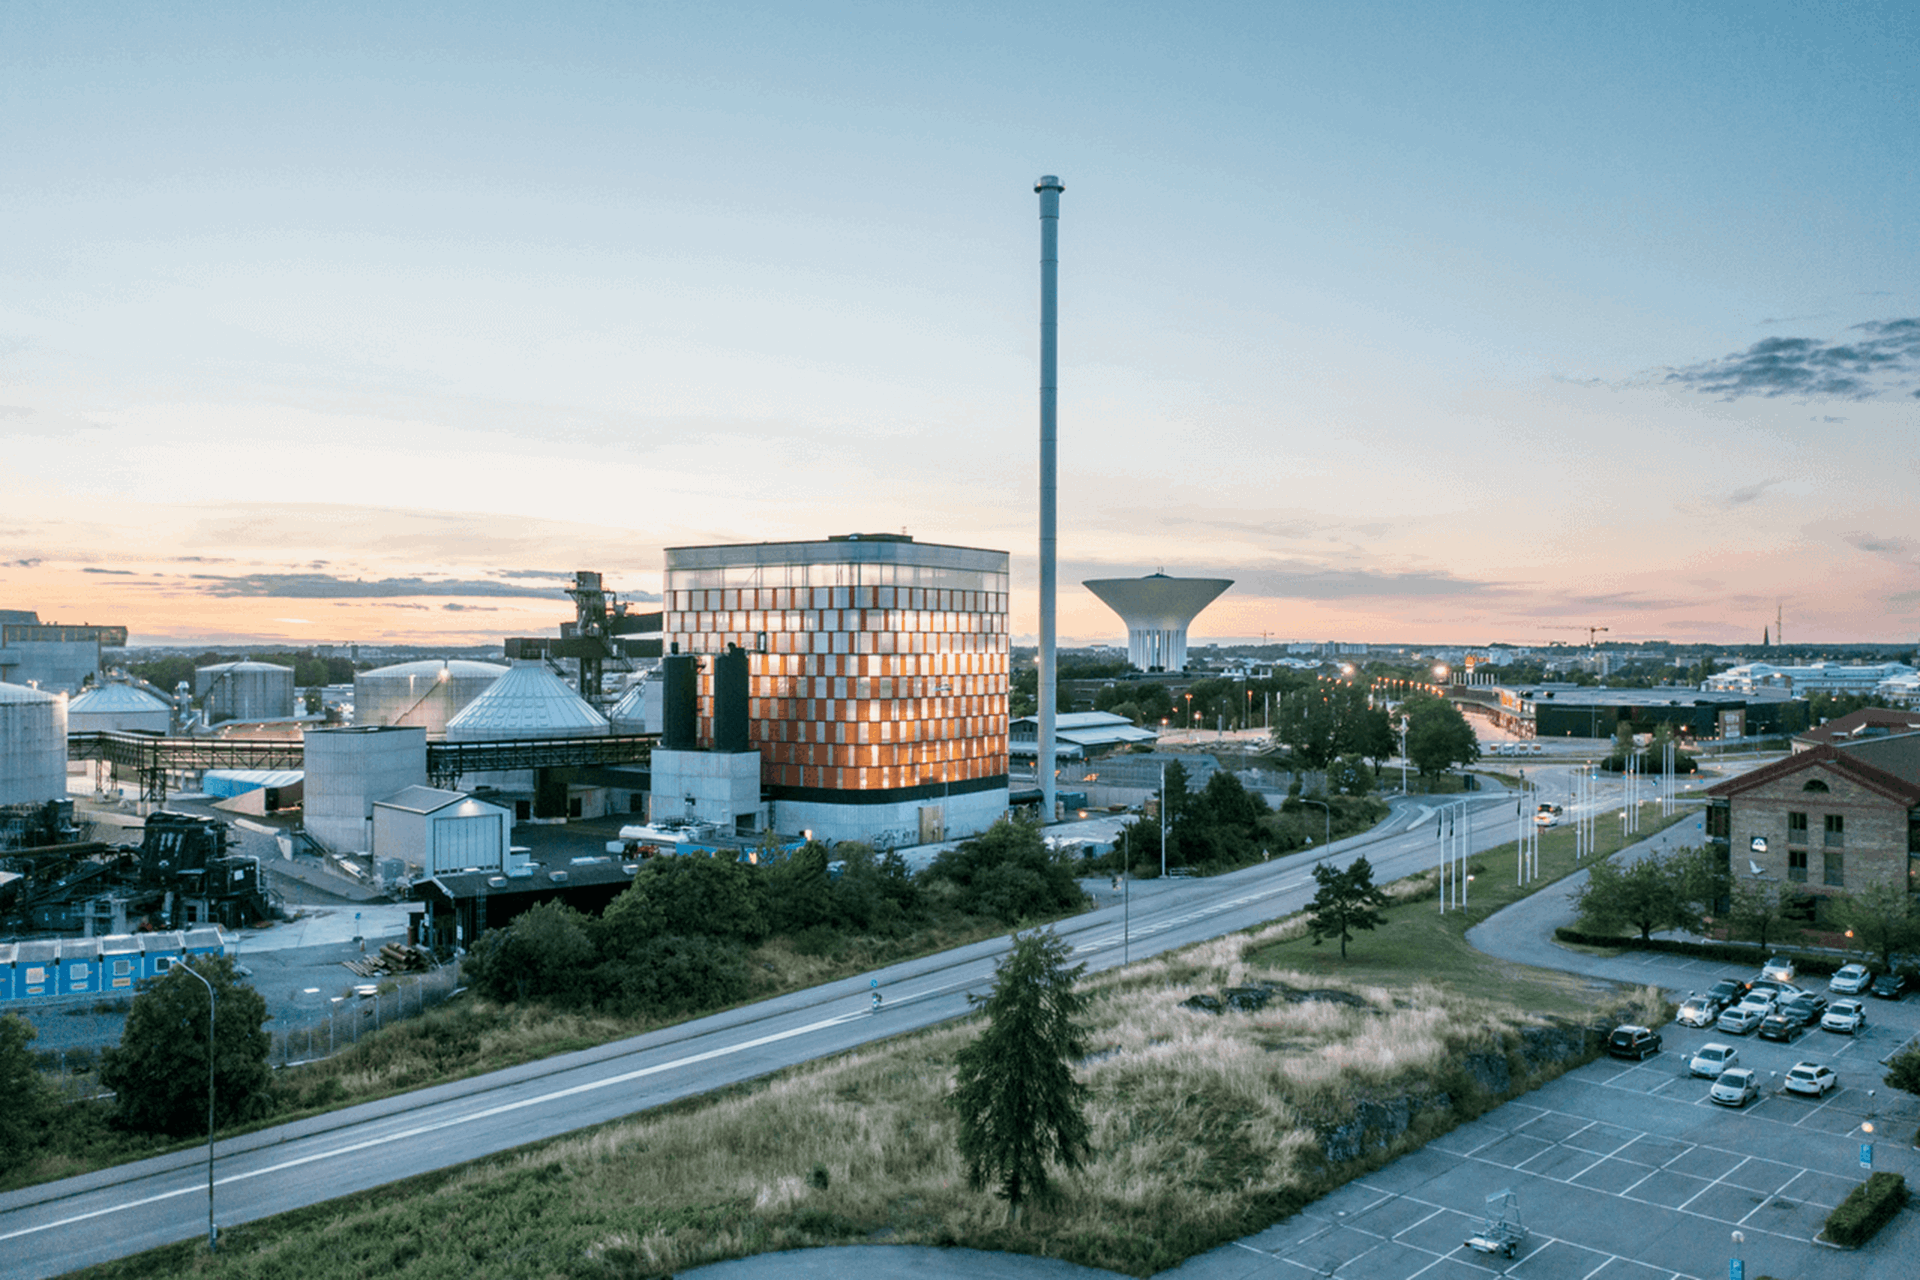 Vattenfall's new heating plant Carpe Futurum will, by replacing peat with biofuels, in the form of recycled wood, groats and bark, contribute to a fossil-free Uppsala.